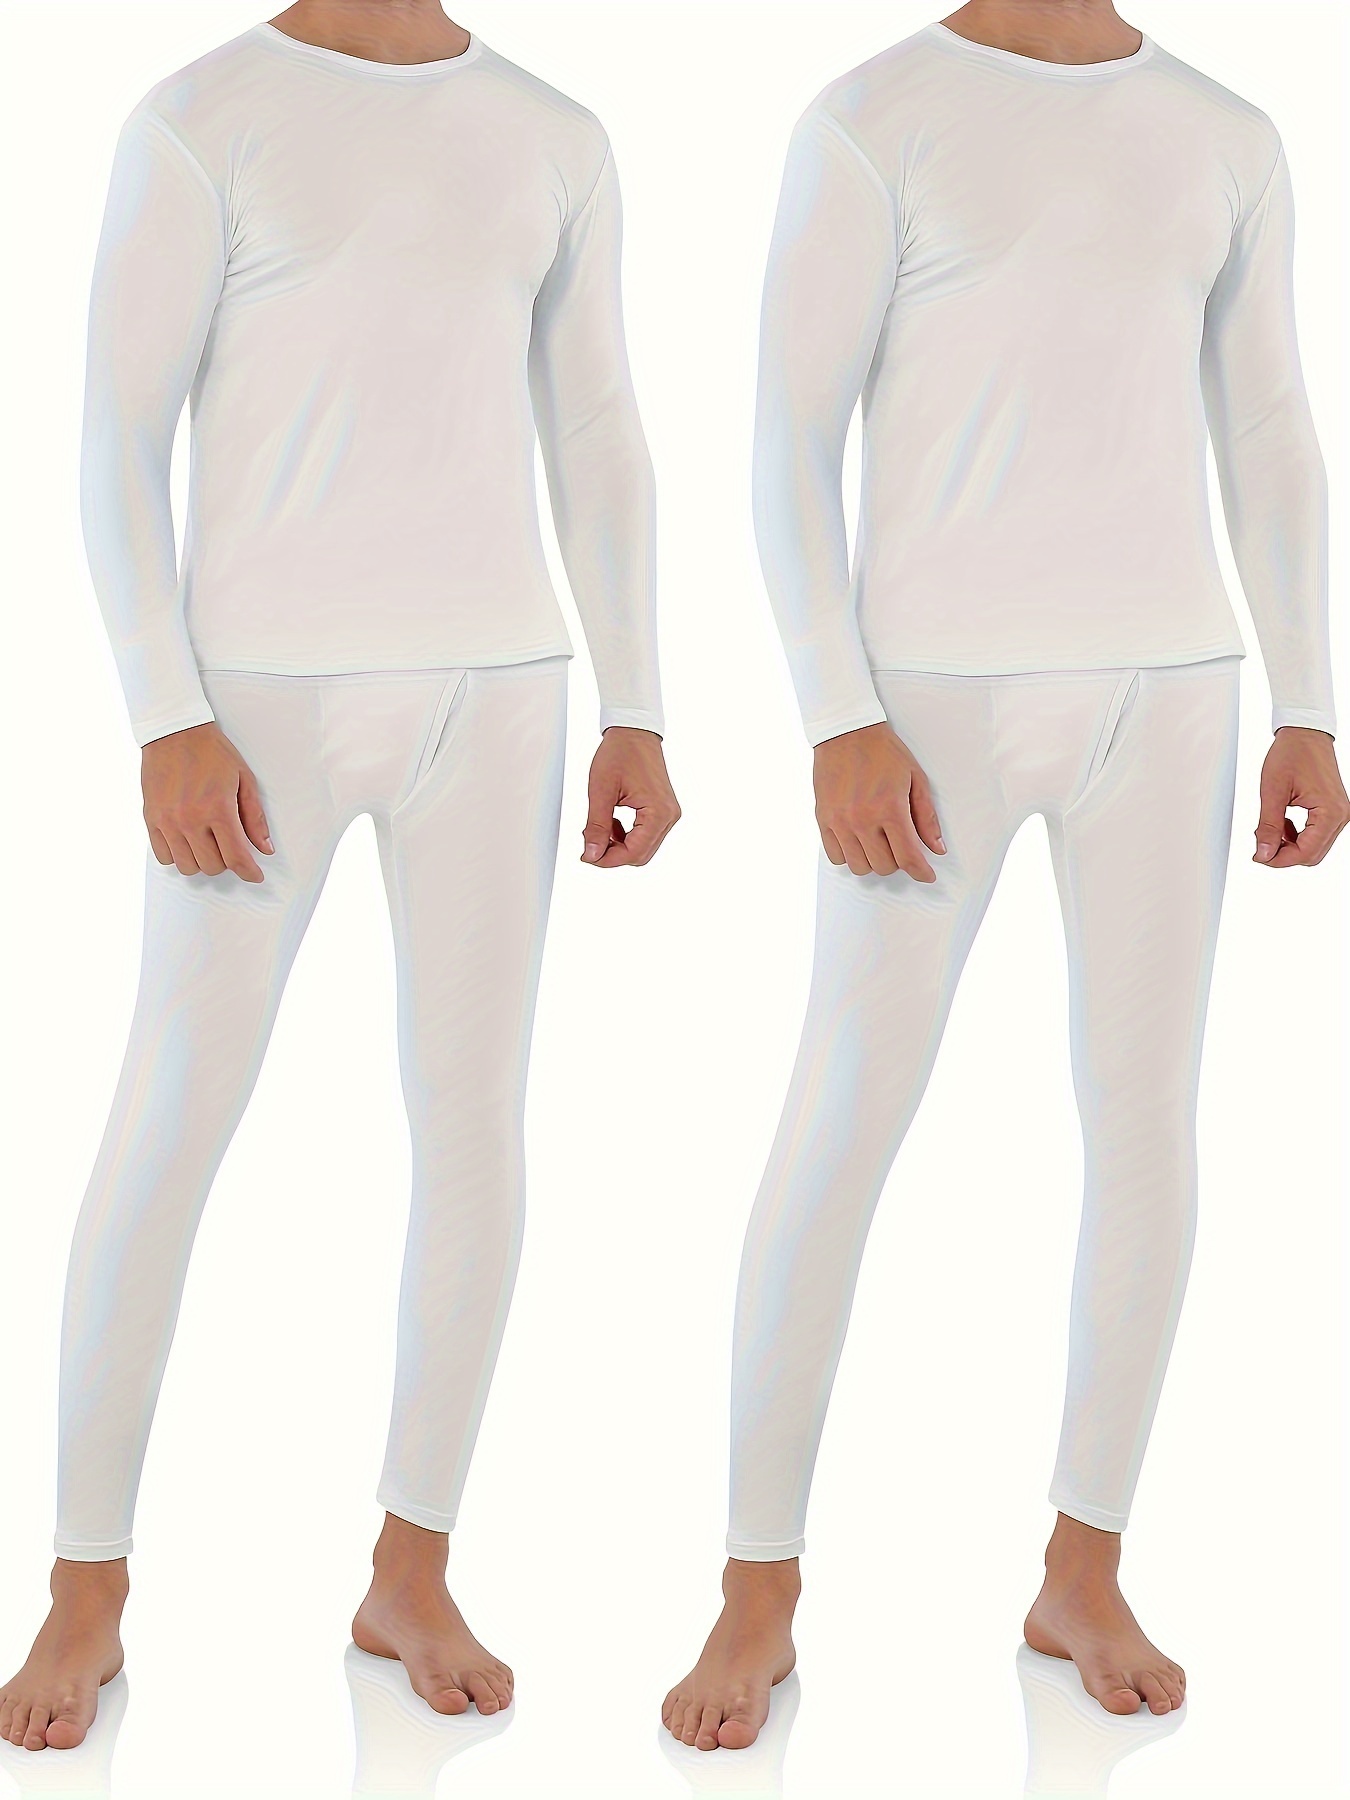 Thermal Underwear for Women, Winter Warm Long Johns Thermal Sets Cold